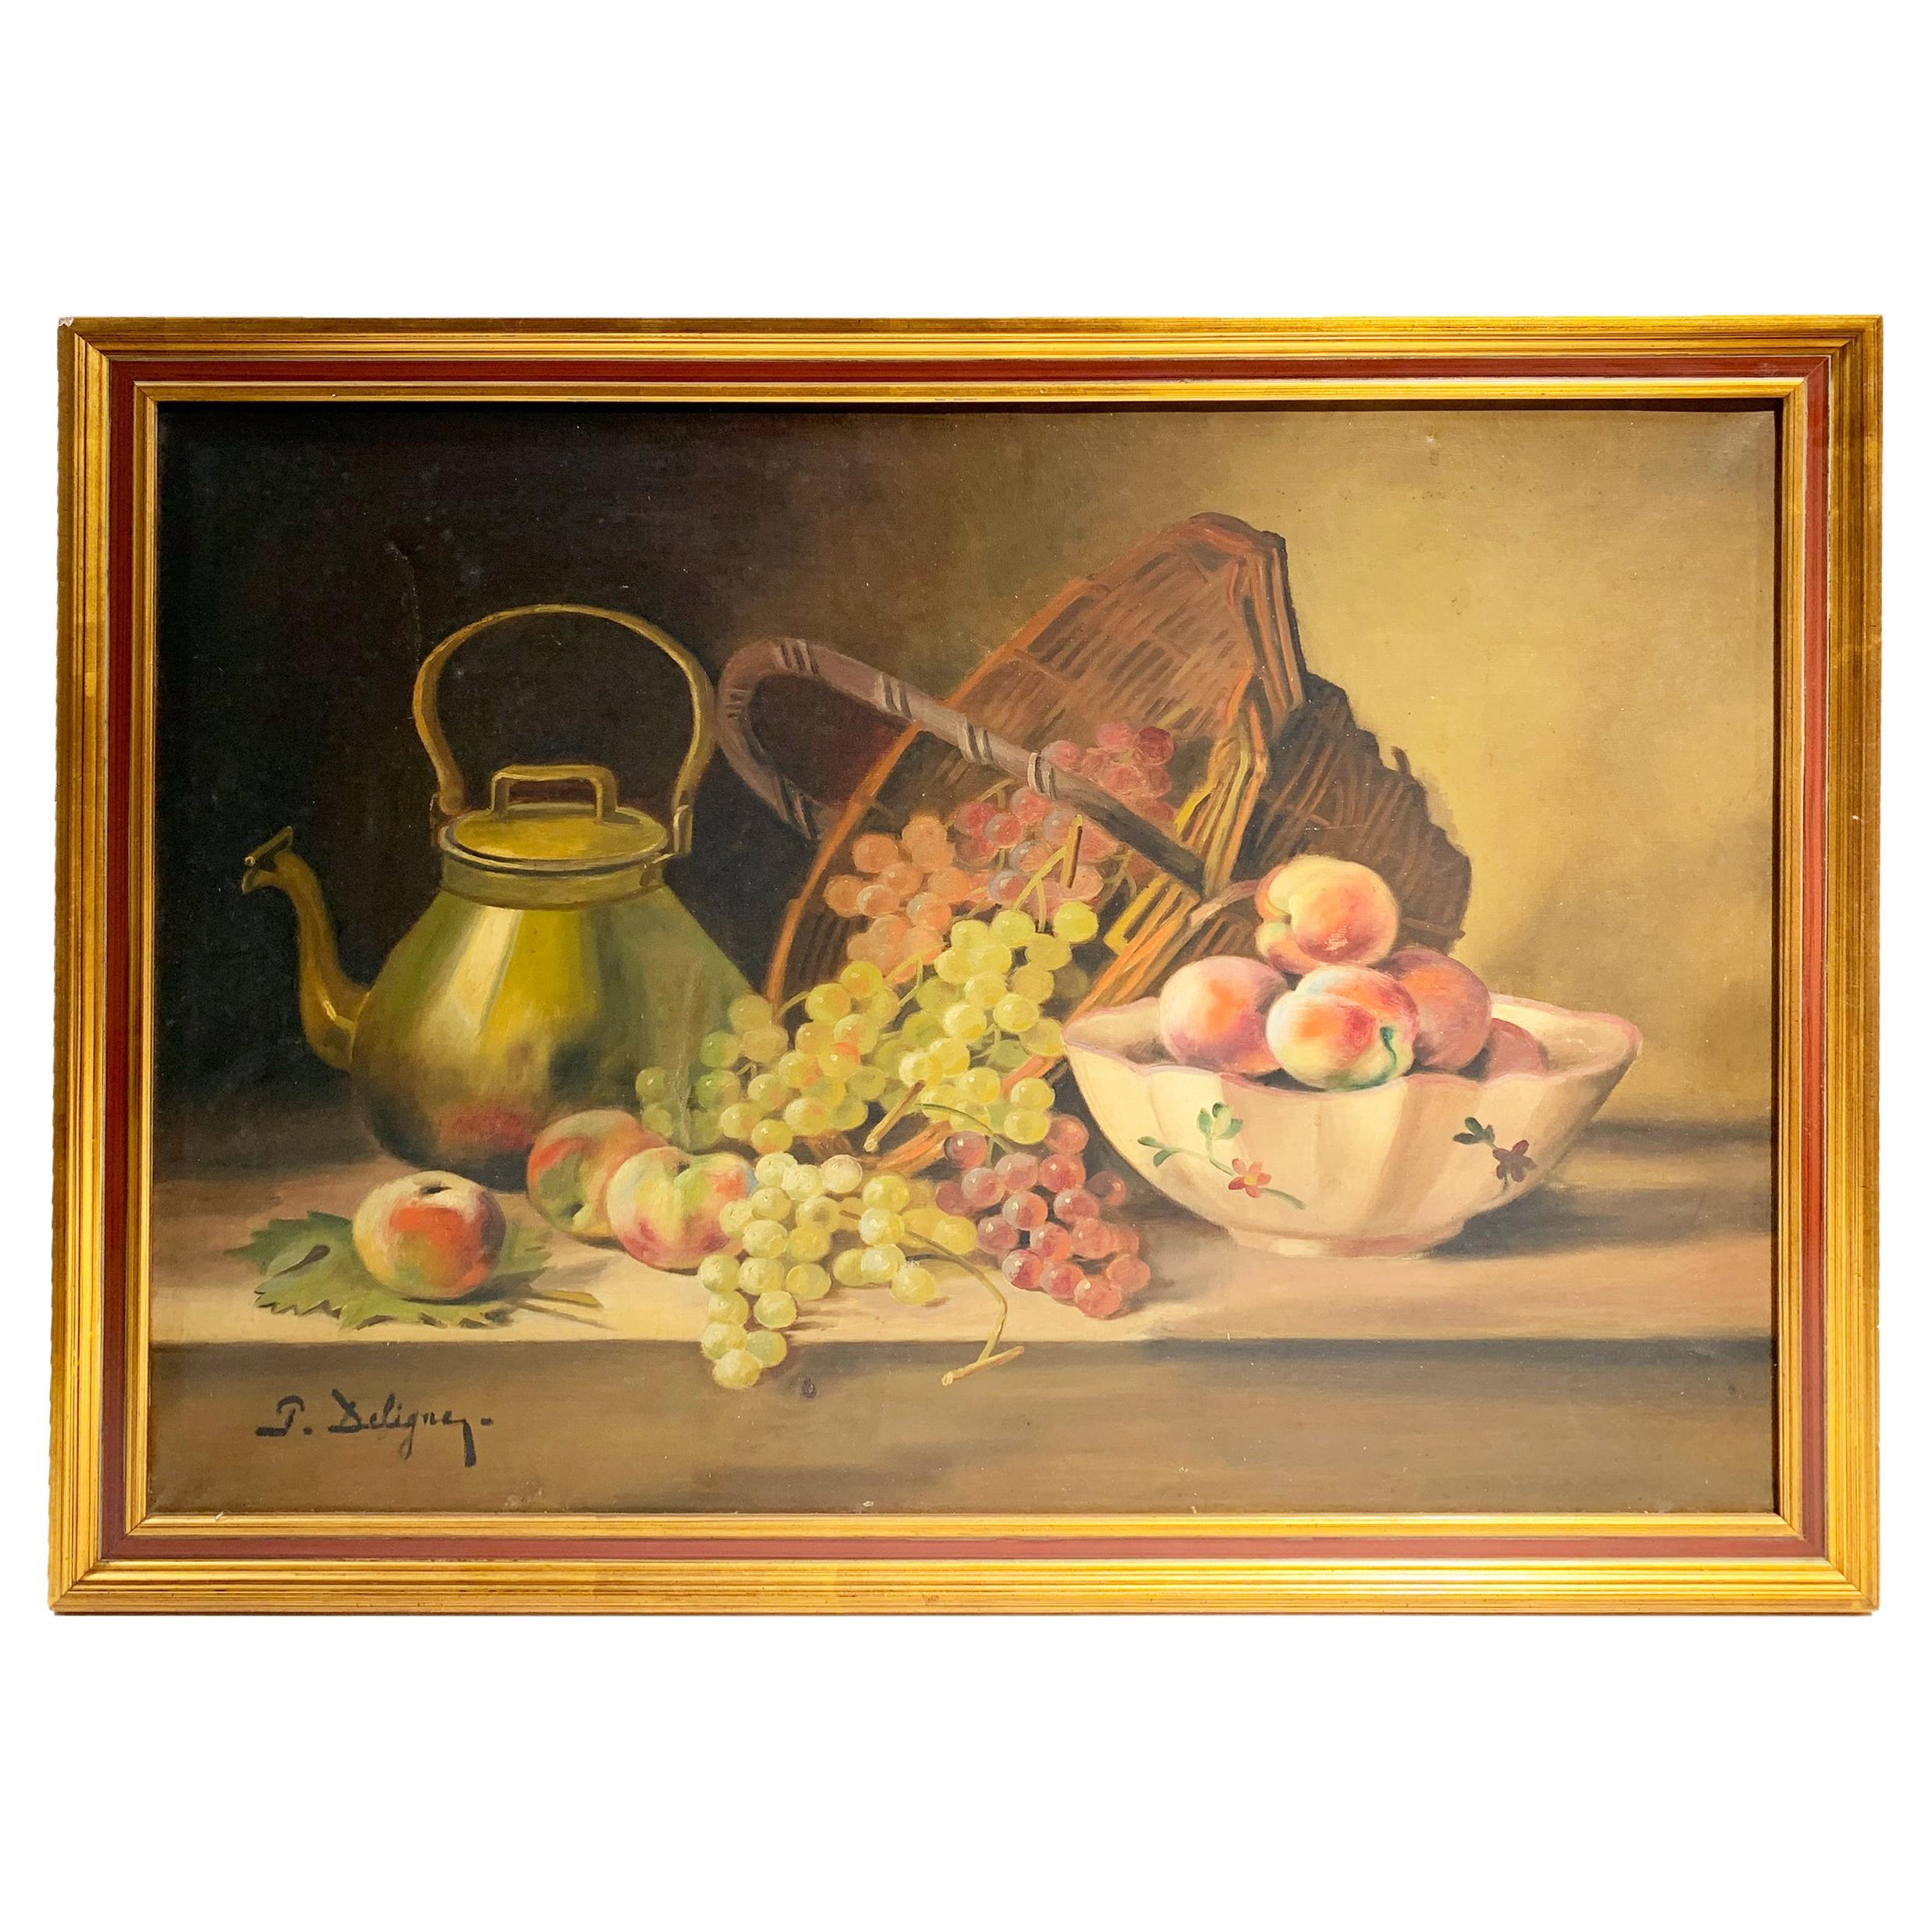 19th Century Still Life Wooden Framed Painting / Oil on Canvas, Signed Deligny For Sale